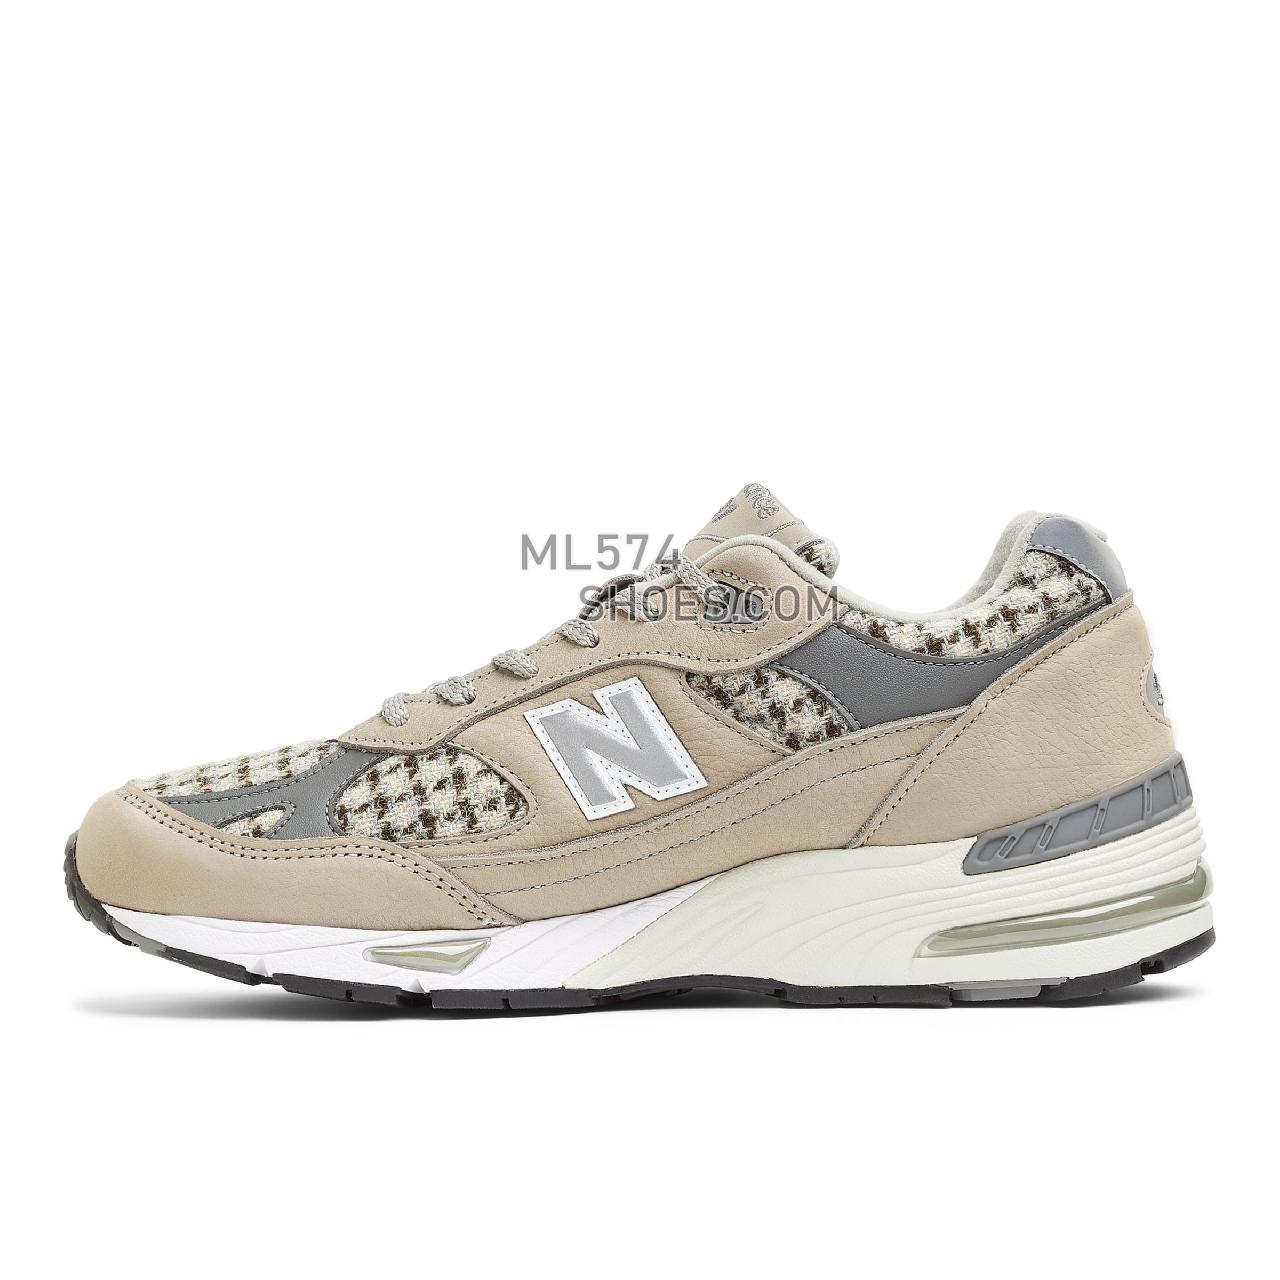 New Balance Made in UK 991 - Men's Made in USA And UK Sneakers - Beige with Grey and Green - M991HT